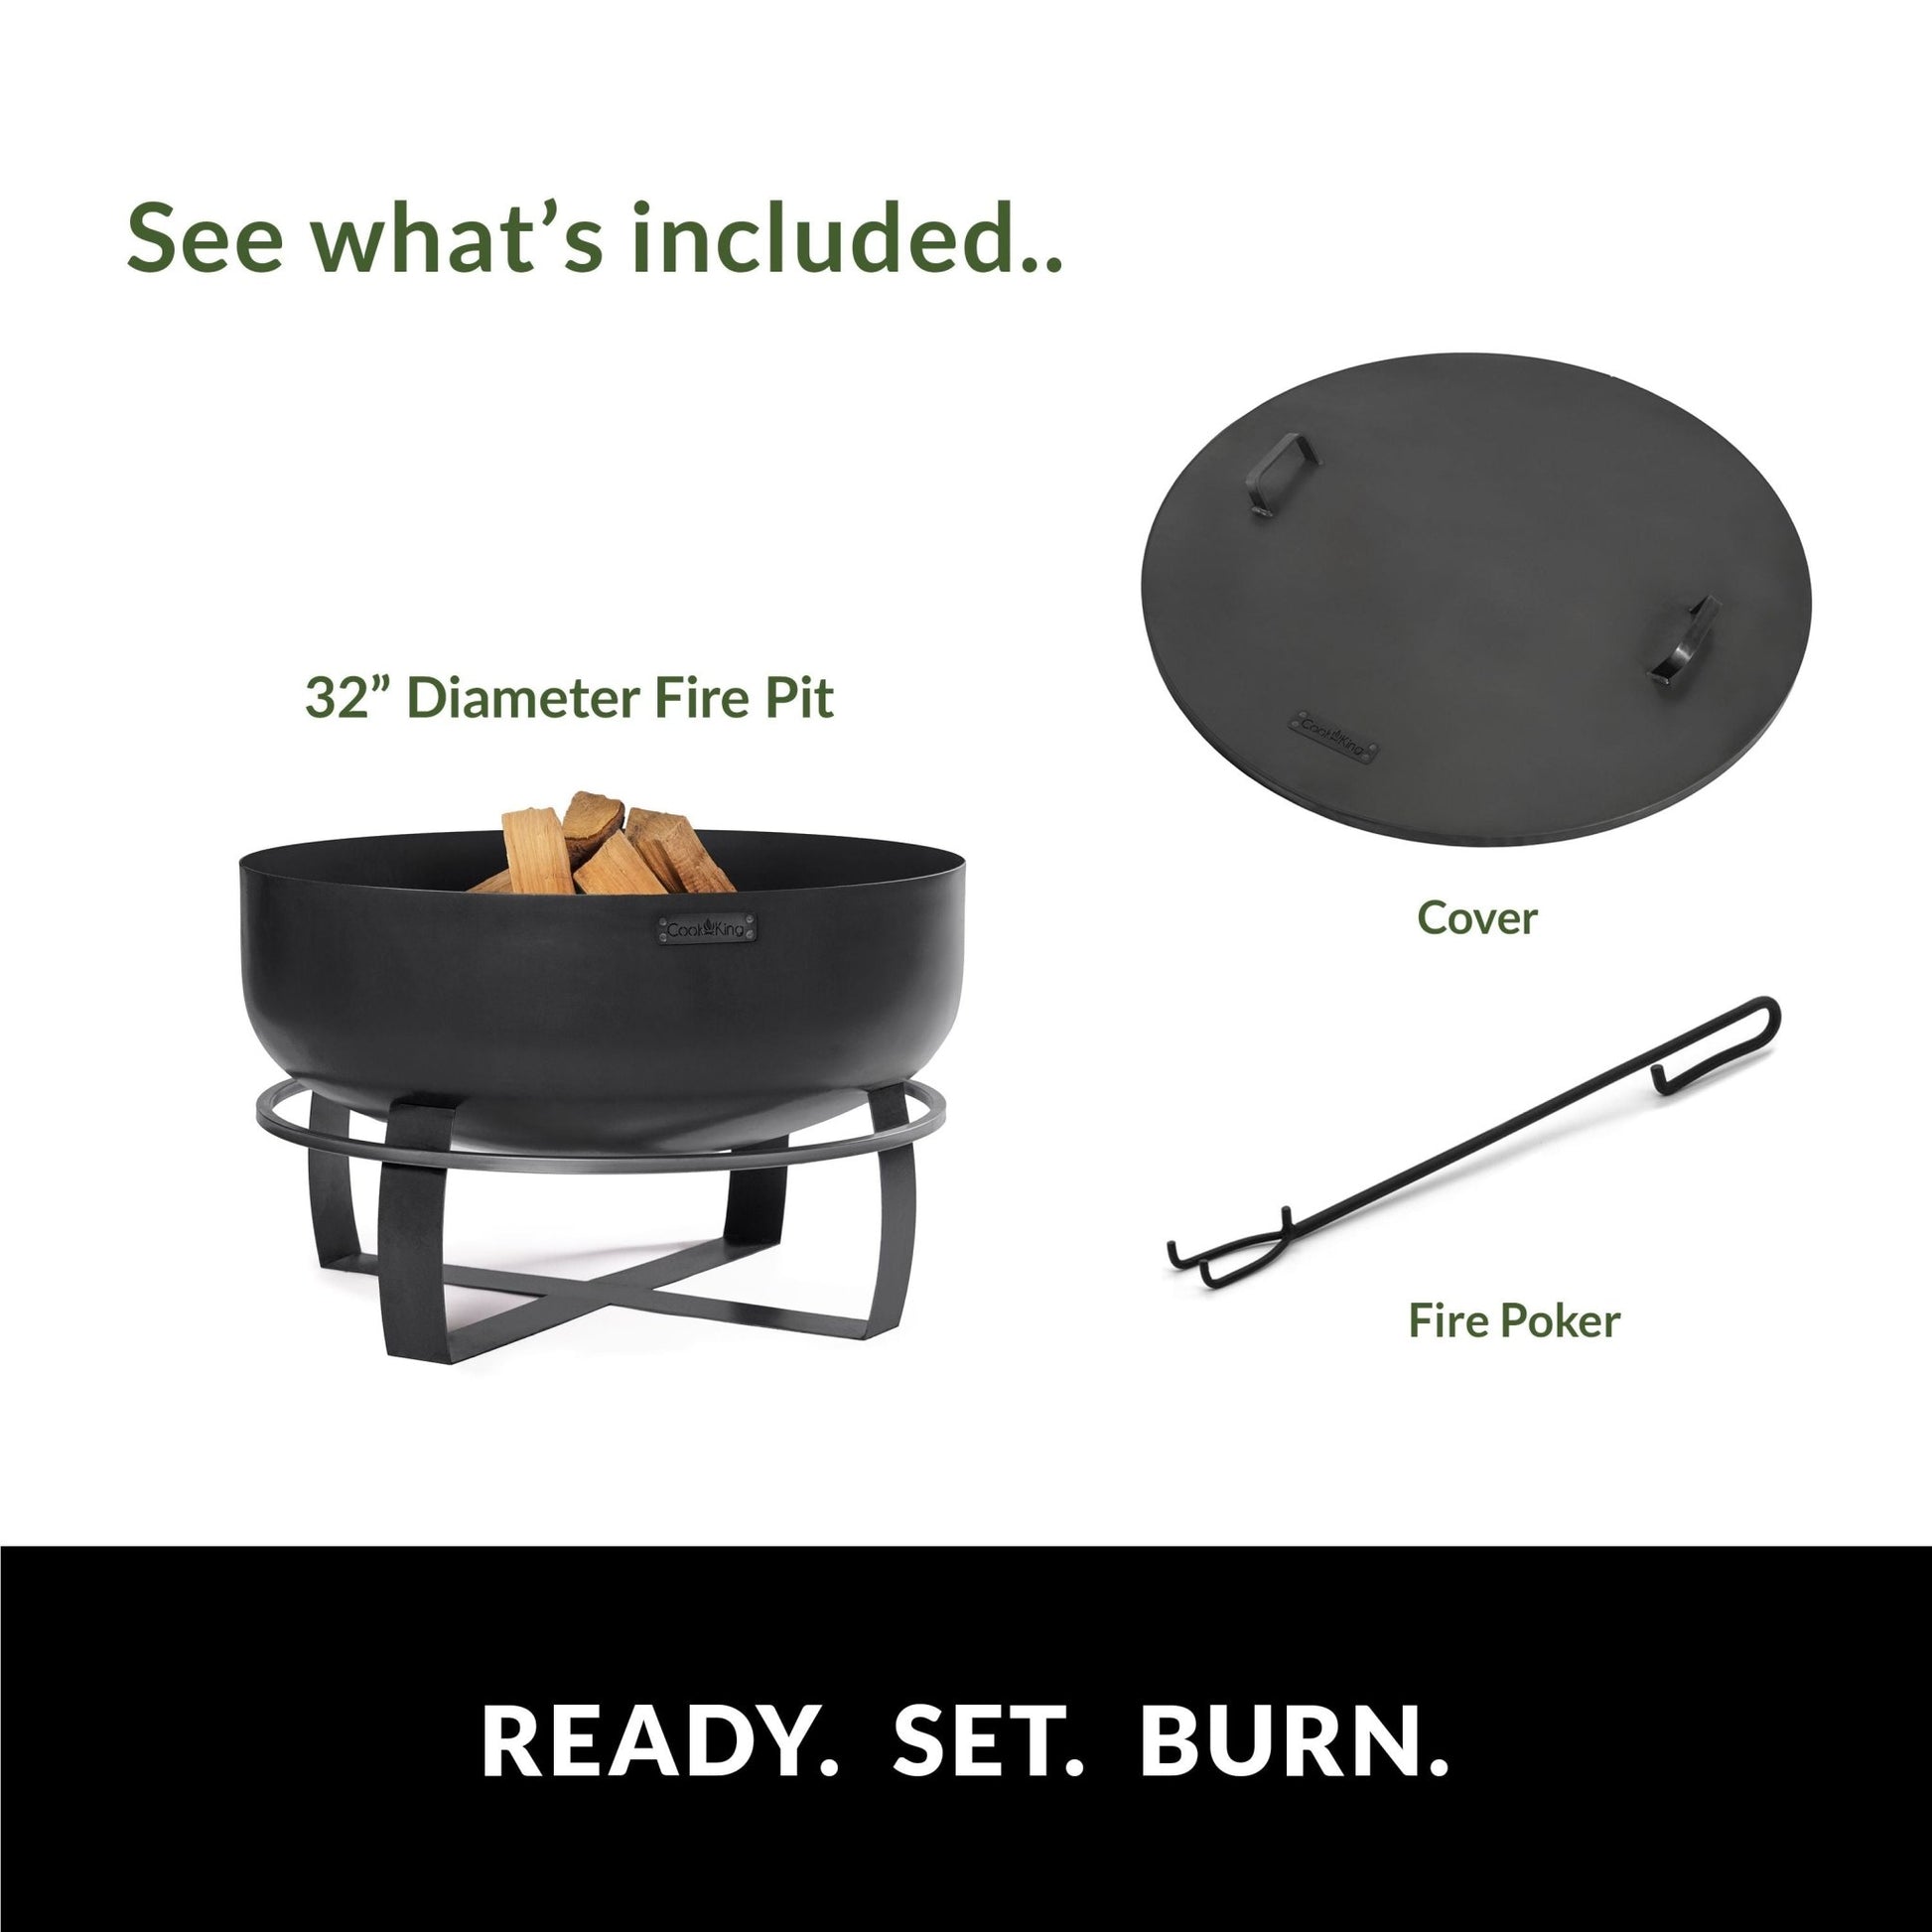 Ignition 32" XXL Fire Pit with Cover Lid - Good Directions